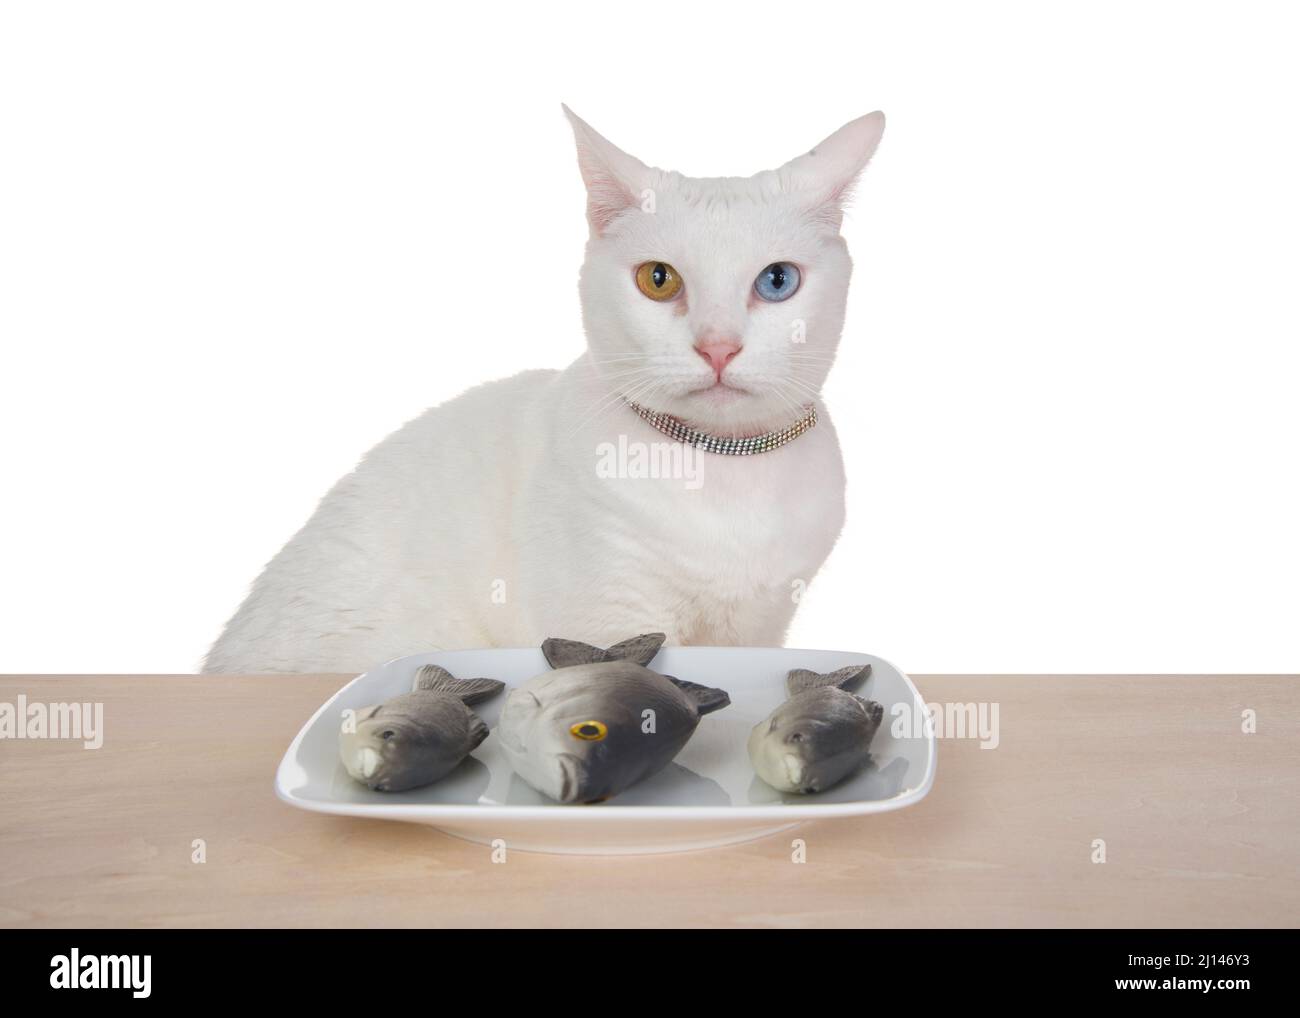 White kao manee cat with heterochromia sitting at a light wood table with square white porcelain plate with trout. Cat looking at viewer, isolated on Stock Photo